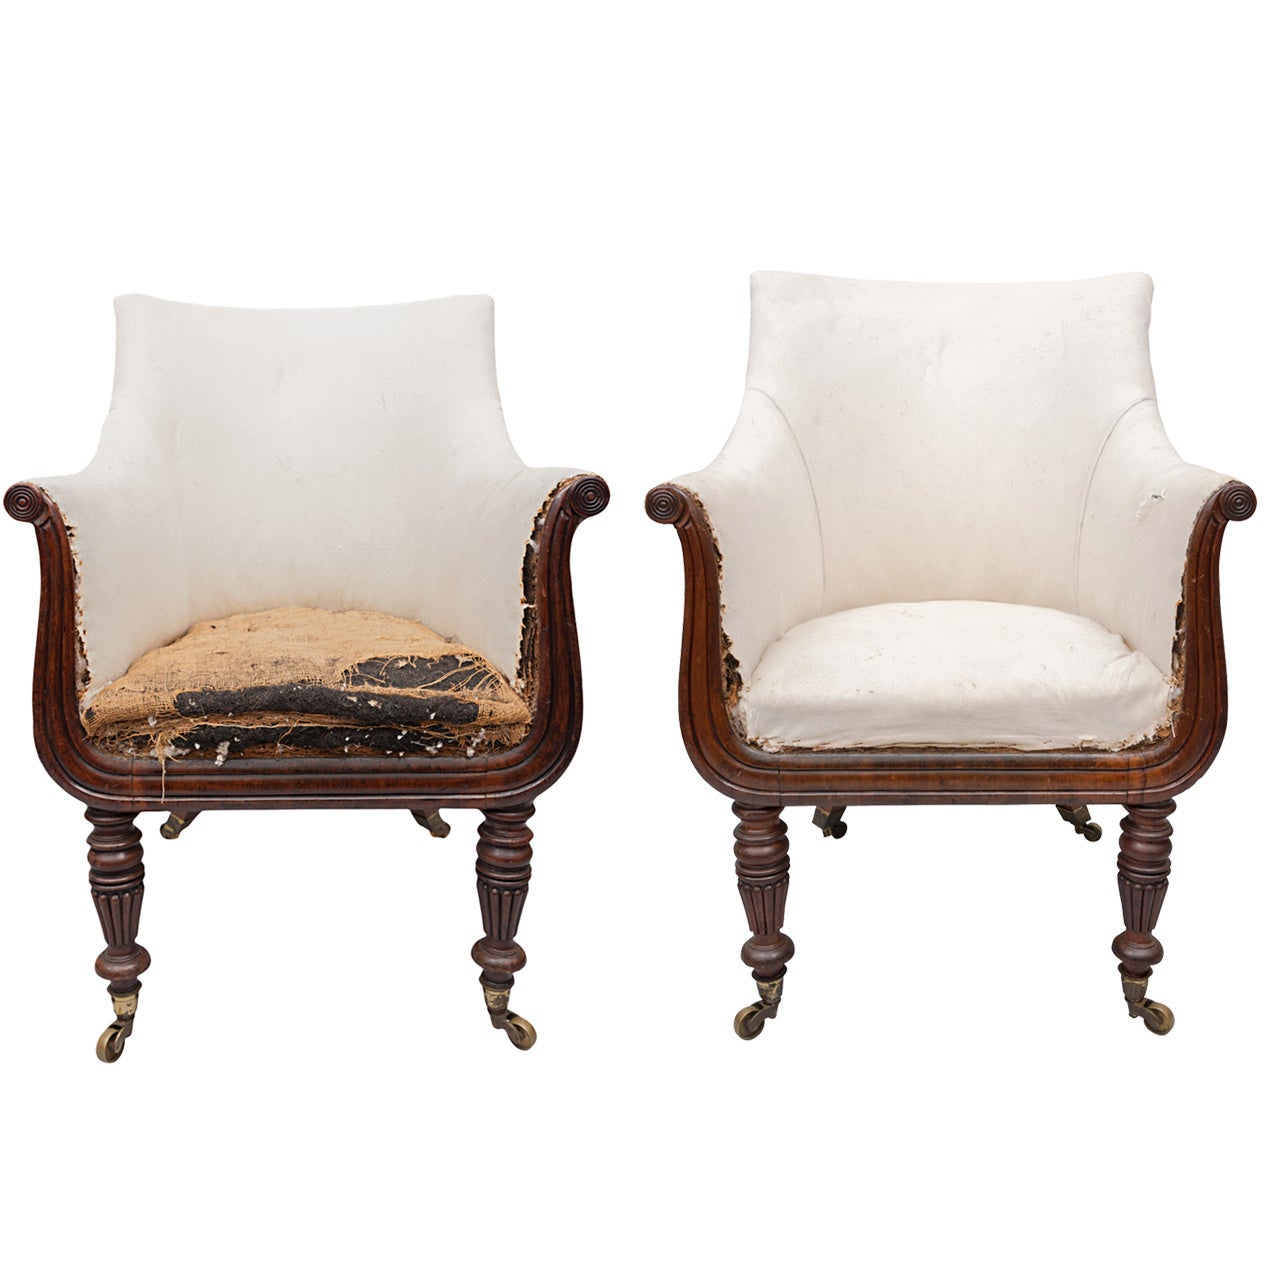 A Pair of Regency Mahogany Bergere Library Chairs